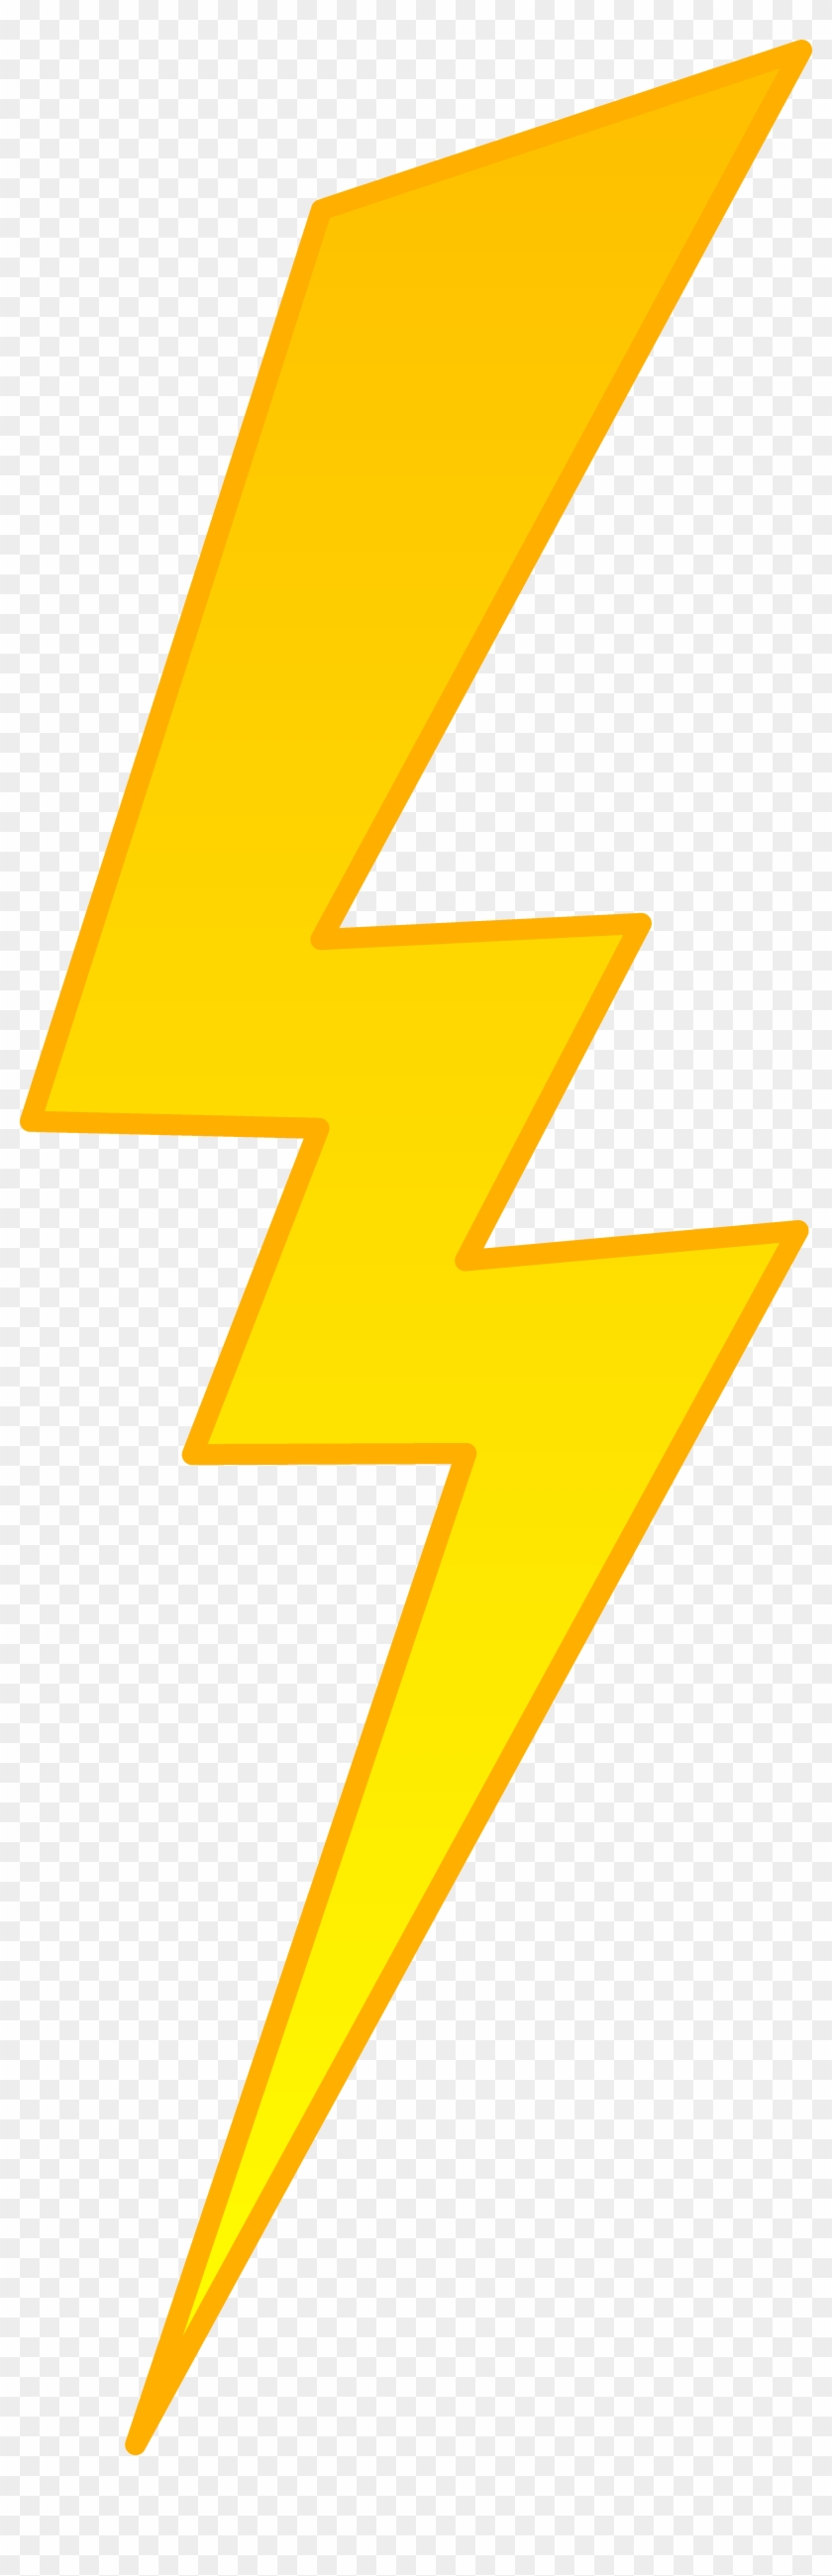 Lightning Bolt Drawing at PaintingValley.com | Explore collection of ...